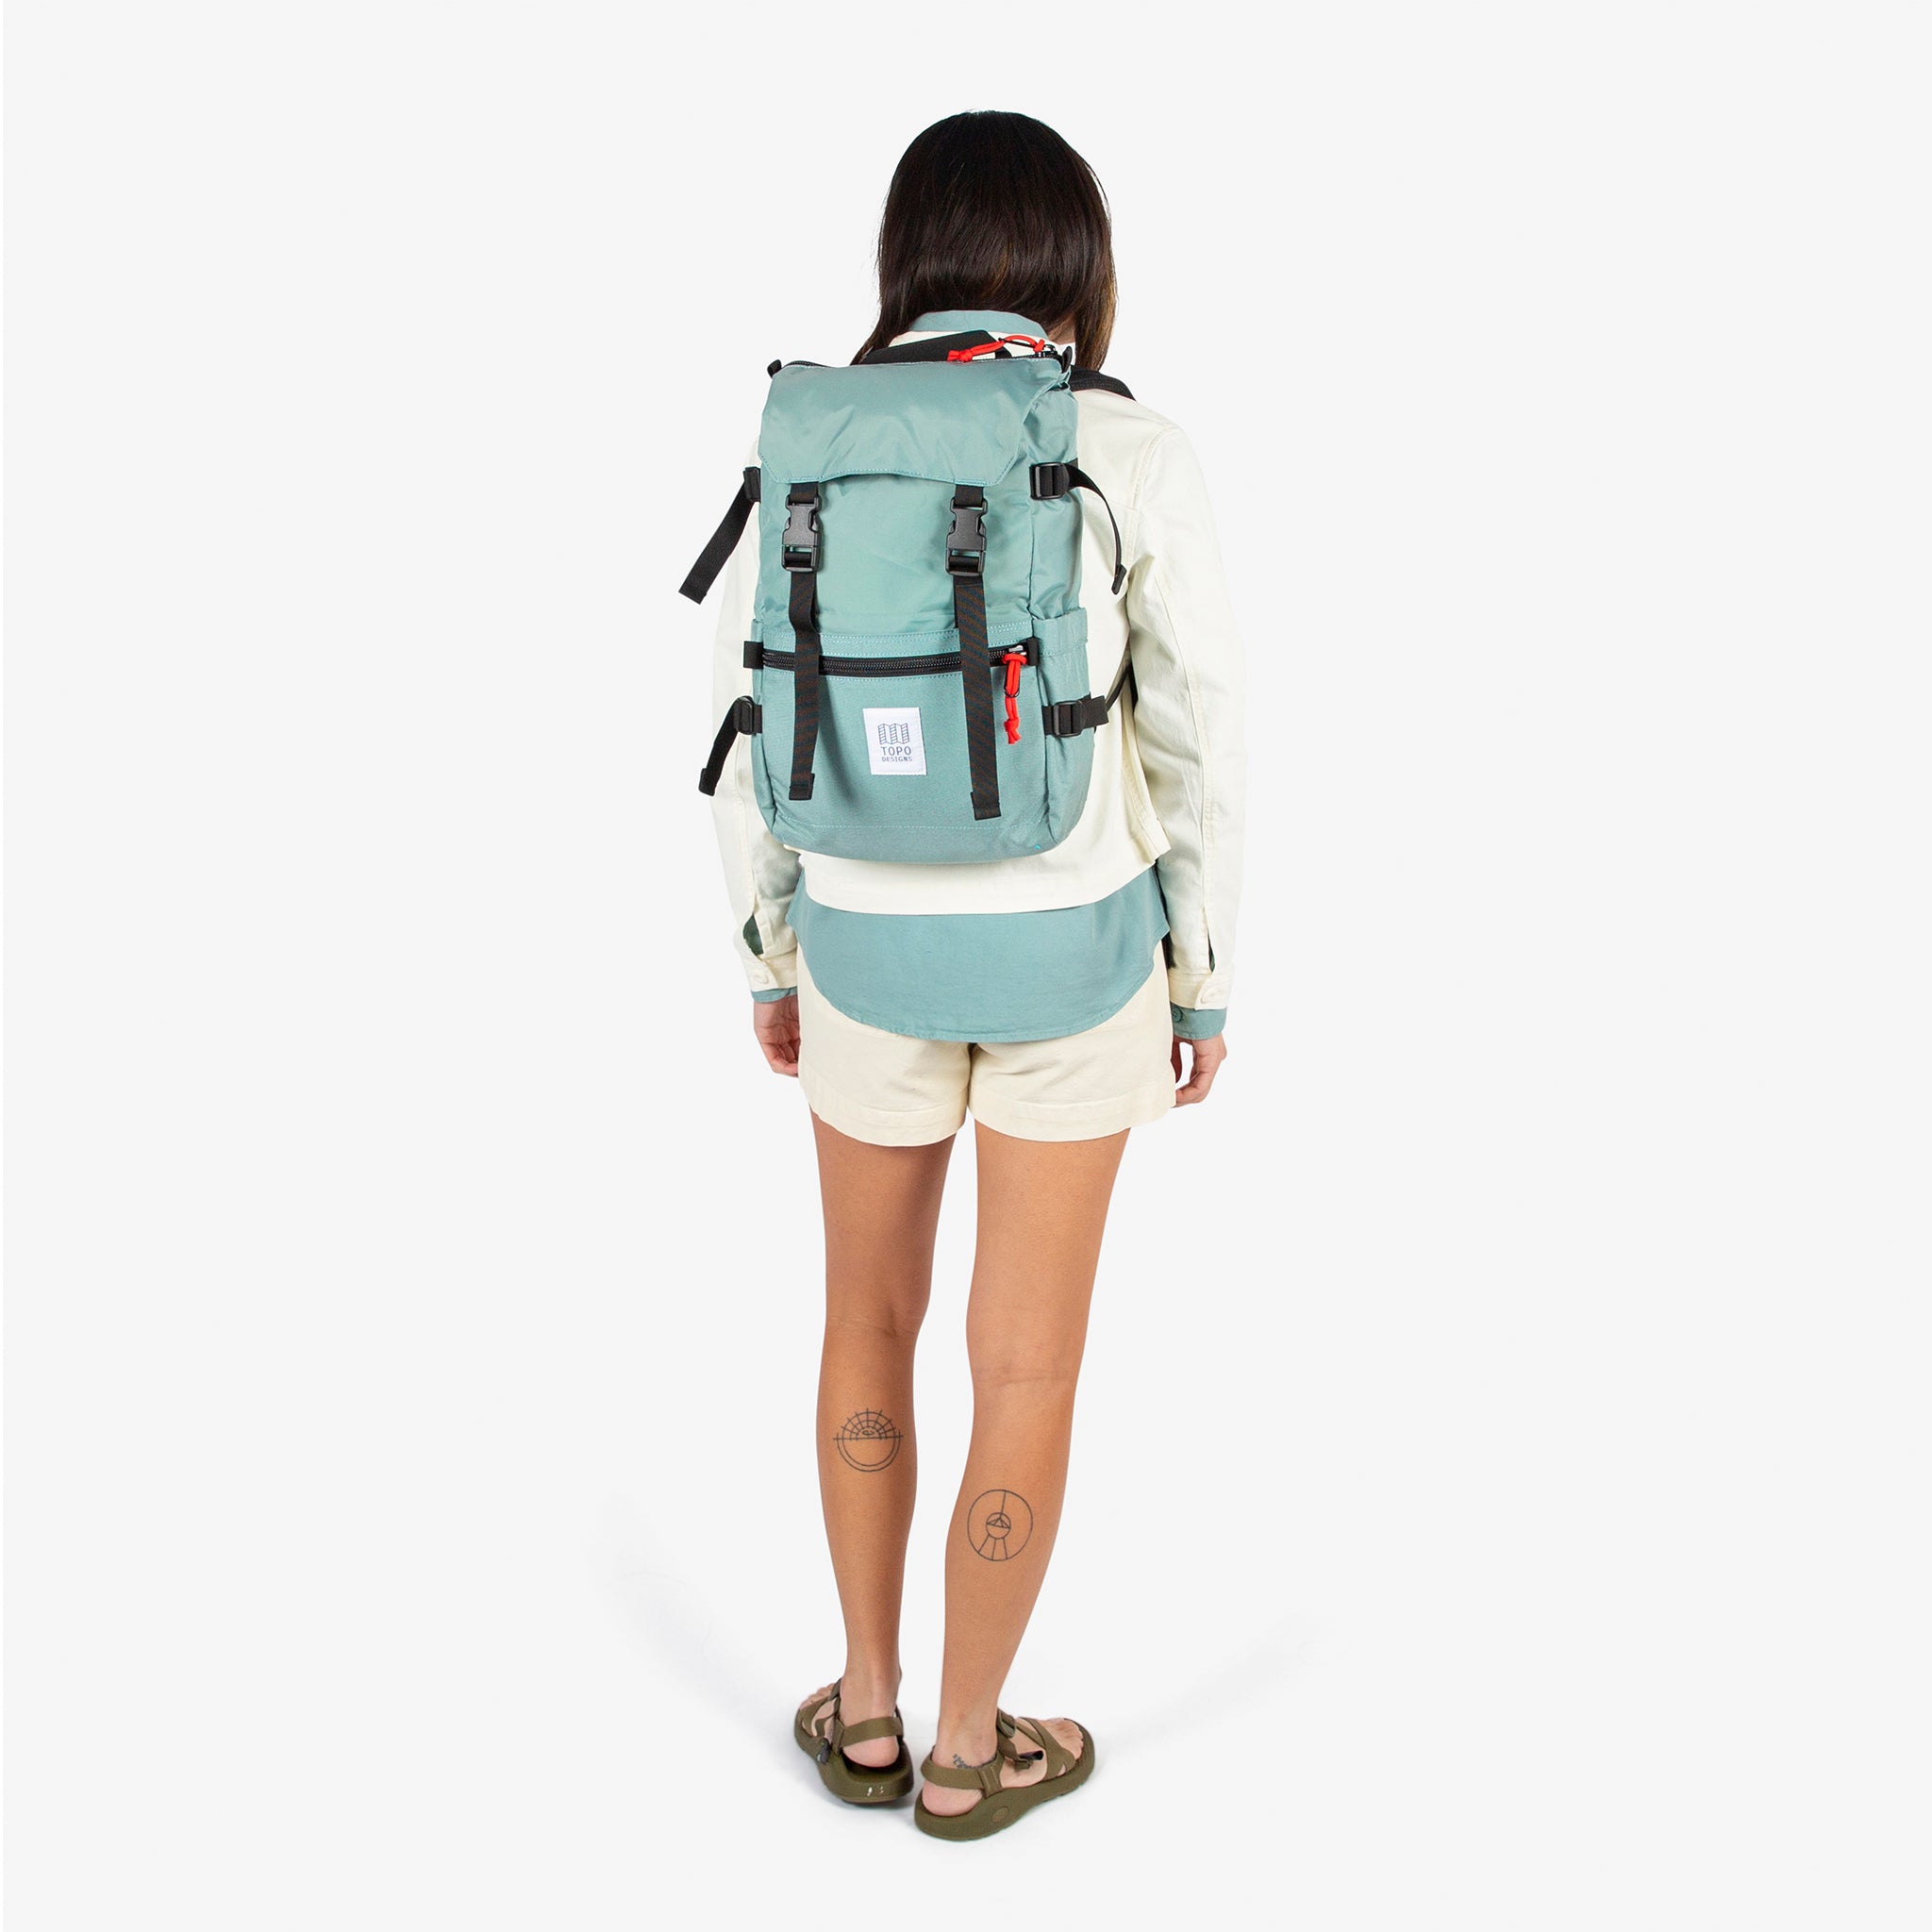 Rover Pack Classic  Small hiking backpack, Hiking backpack women, Trekking  outfit women